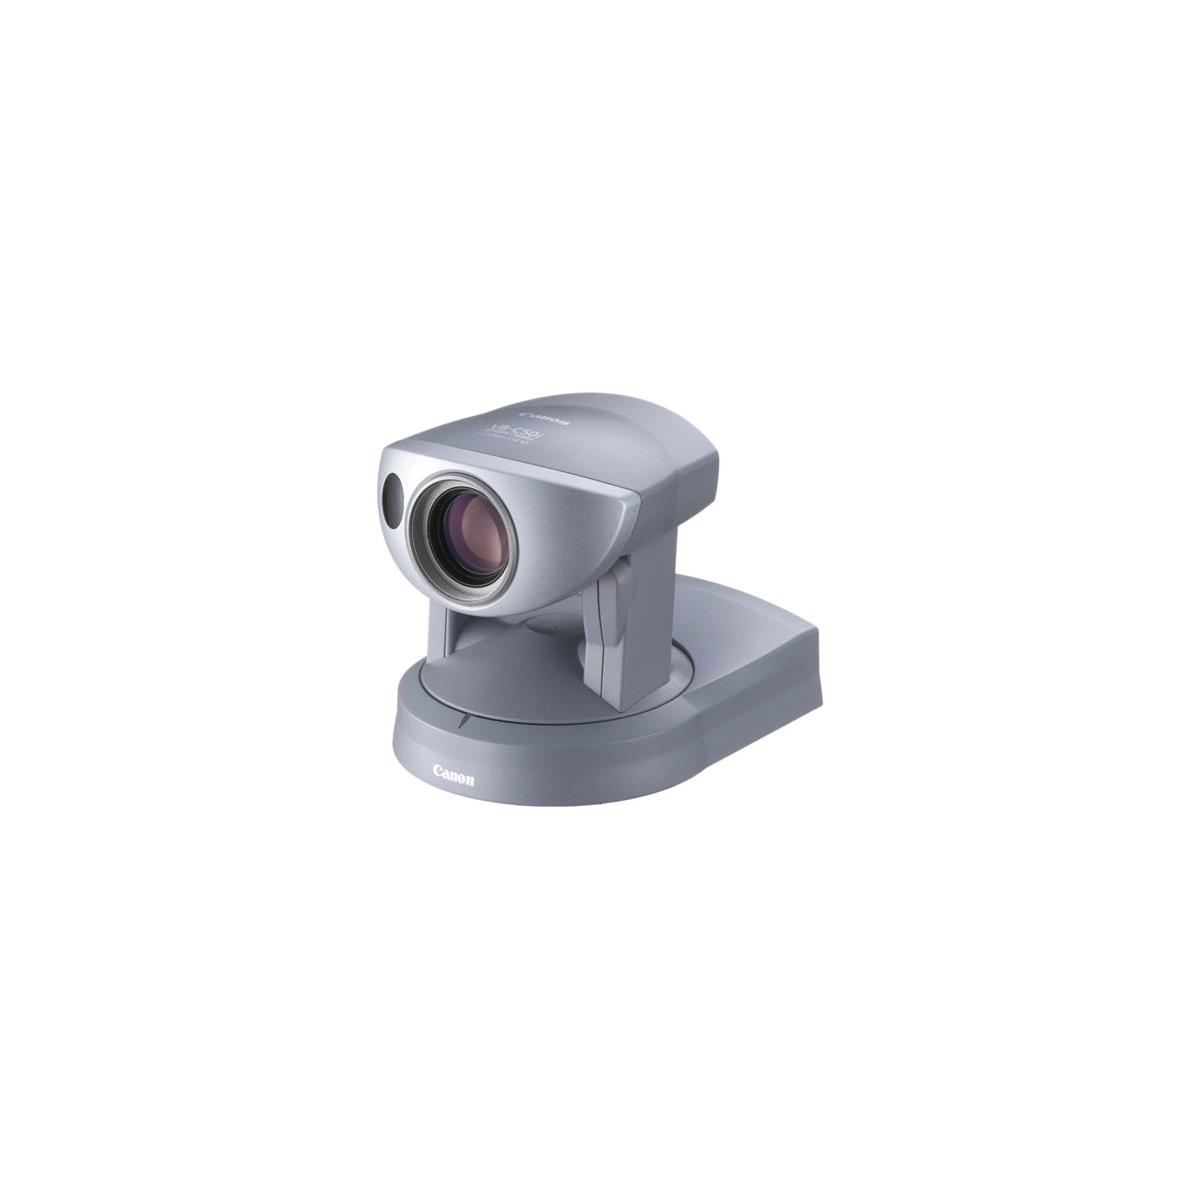 Image of Canon VB-C50iR Network Camera with Reverse Mount